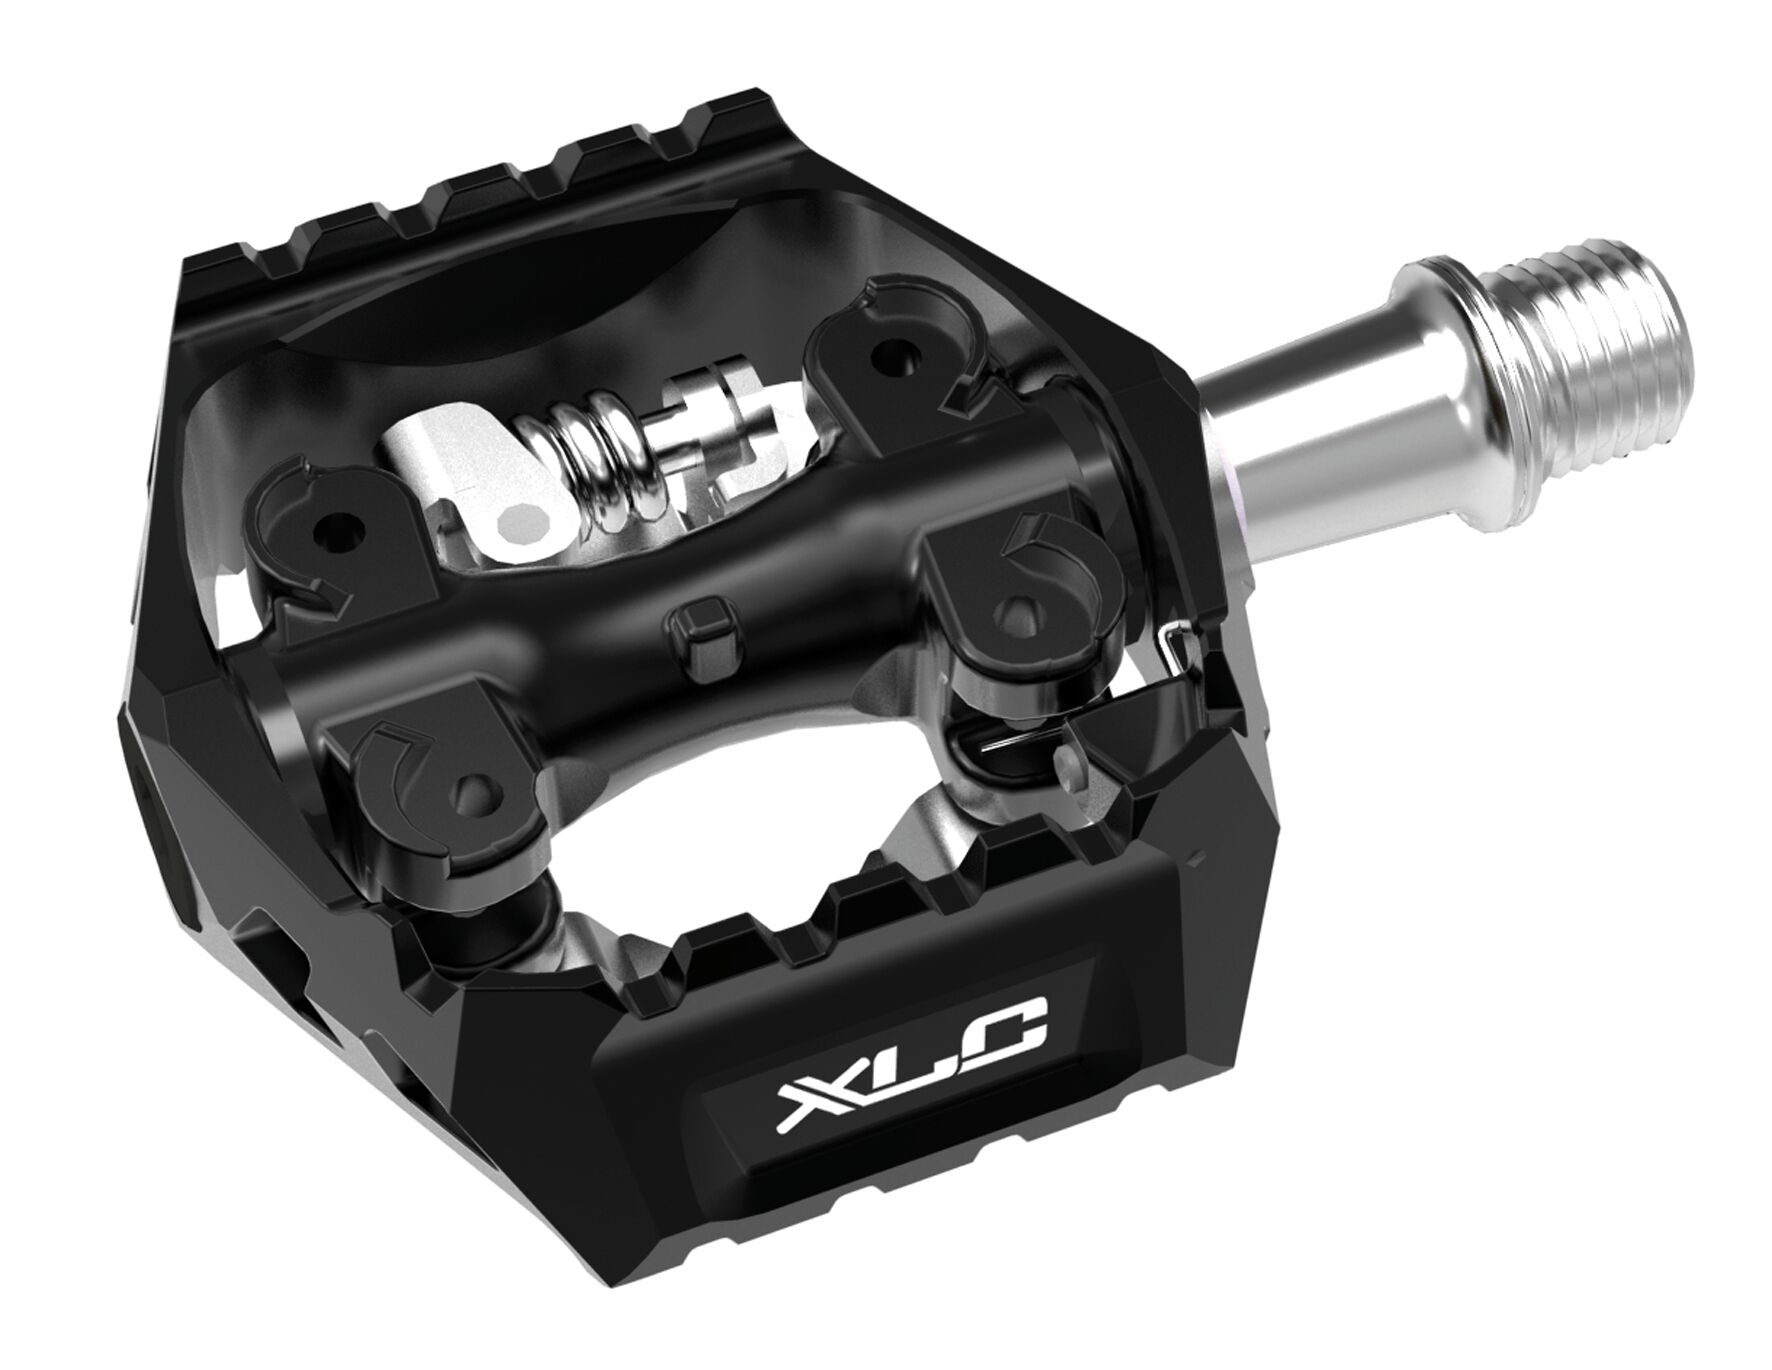 PD-S14, sided Xlc pedal XLC black, one system |